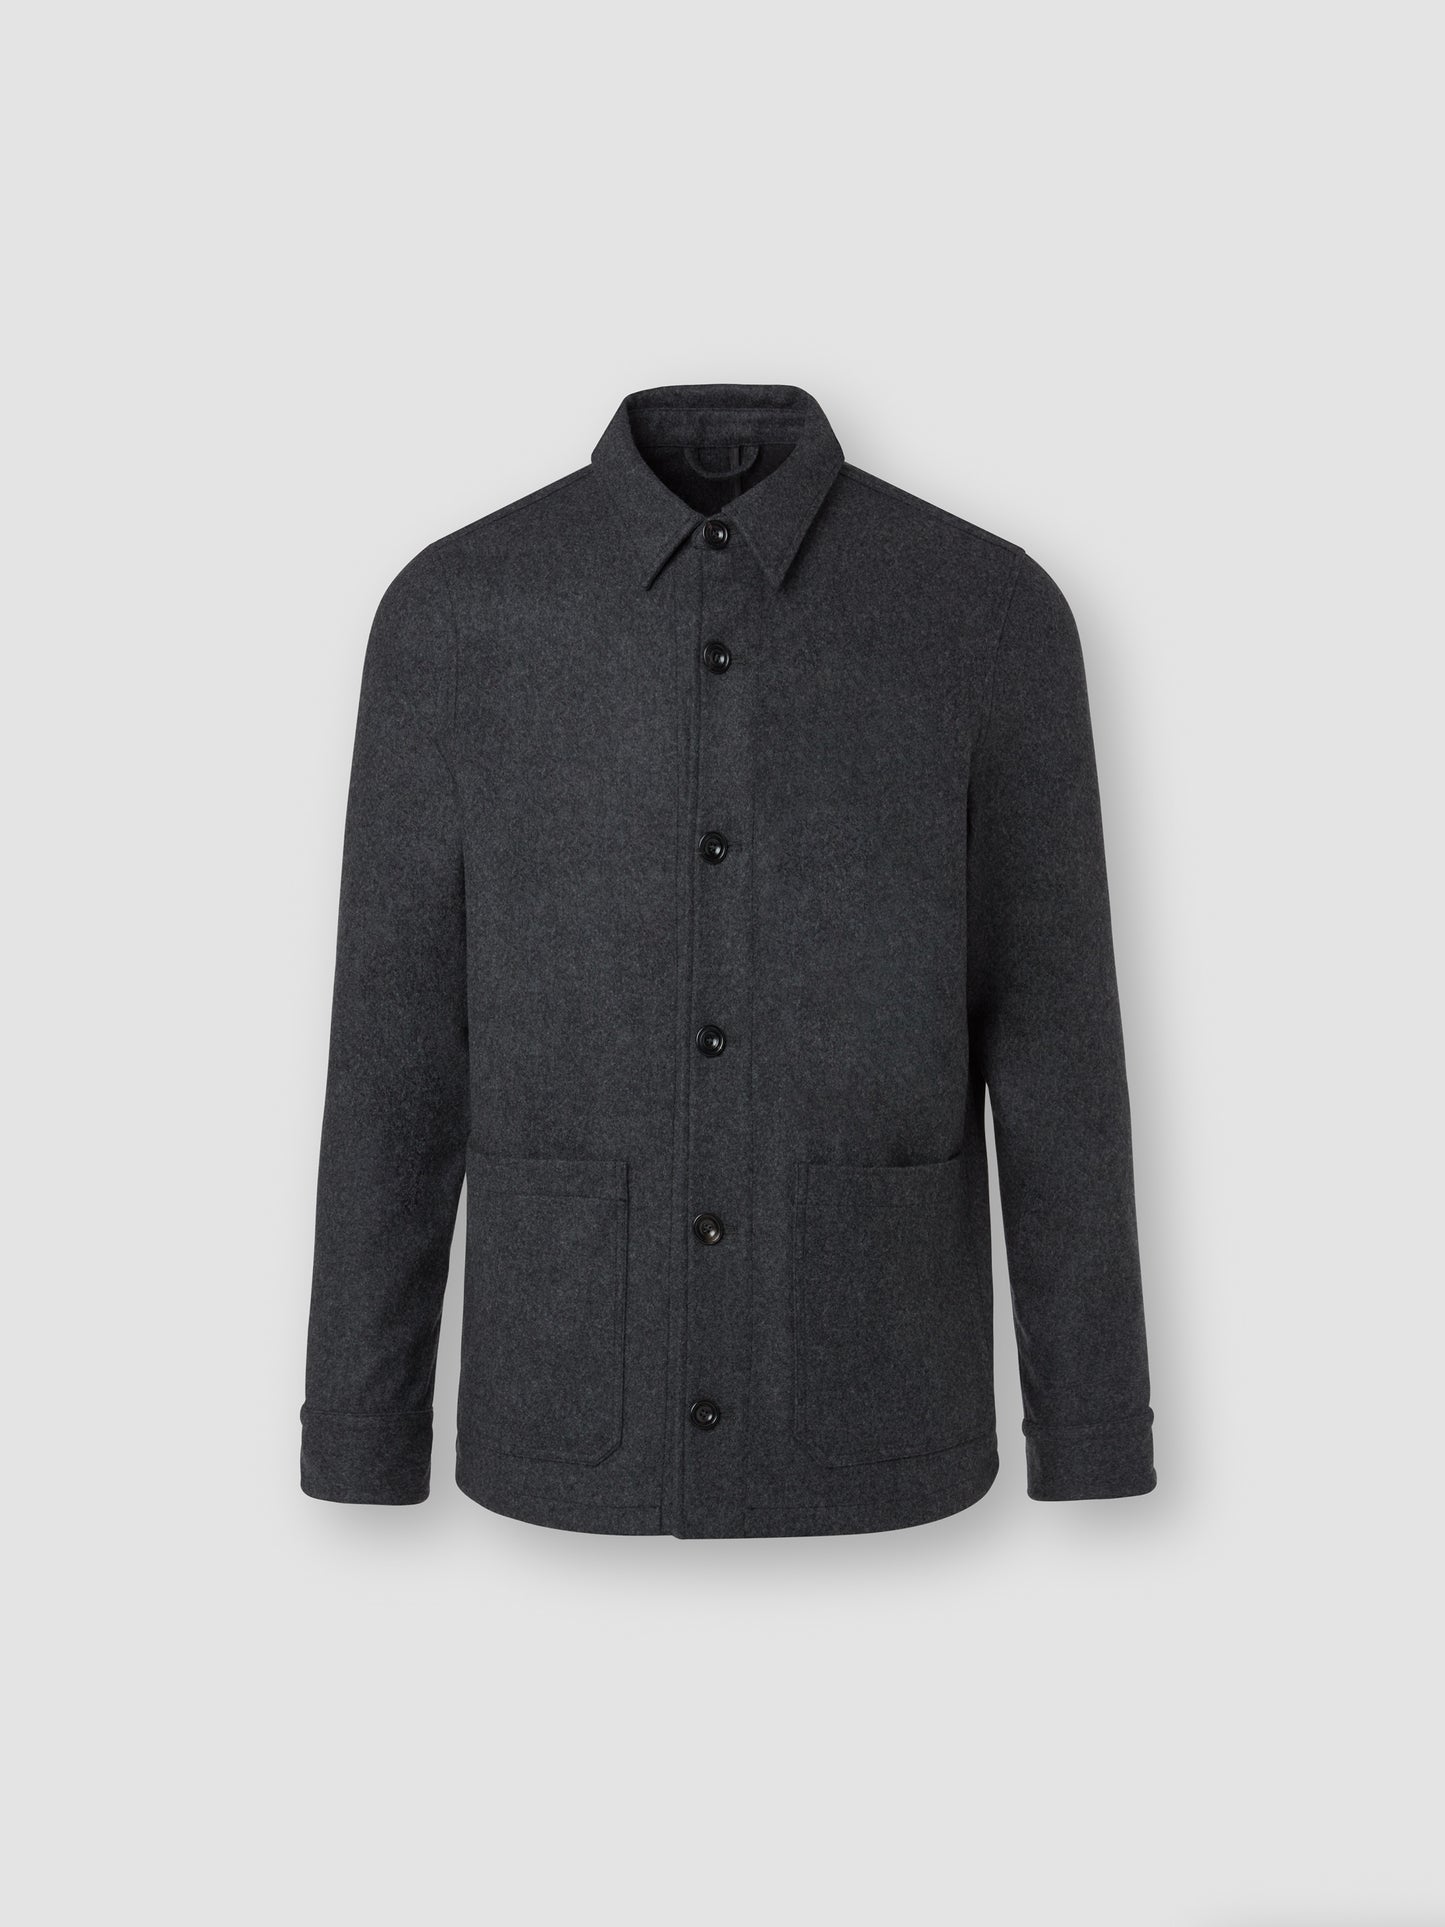 Flannel Chore Jacket Charcoal Product Image